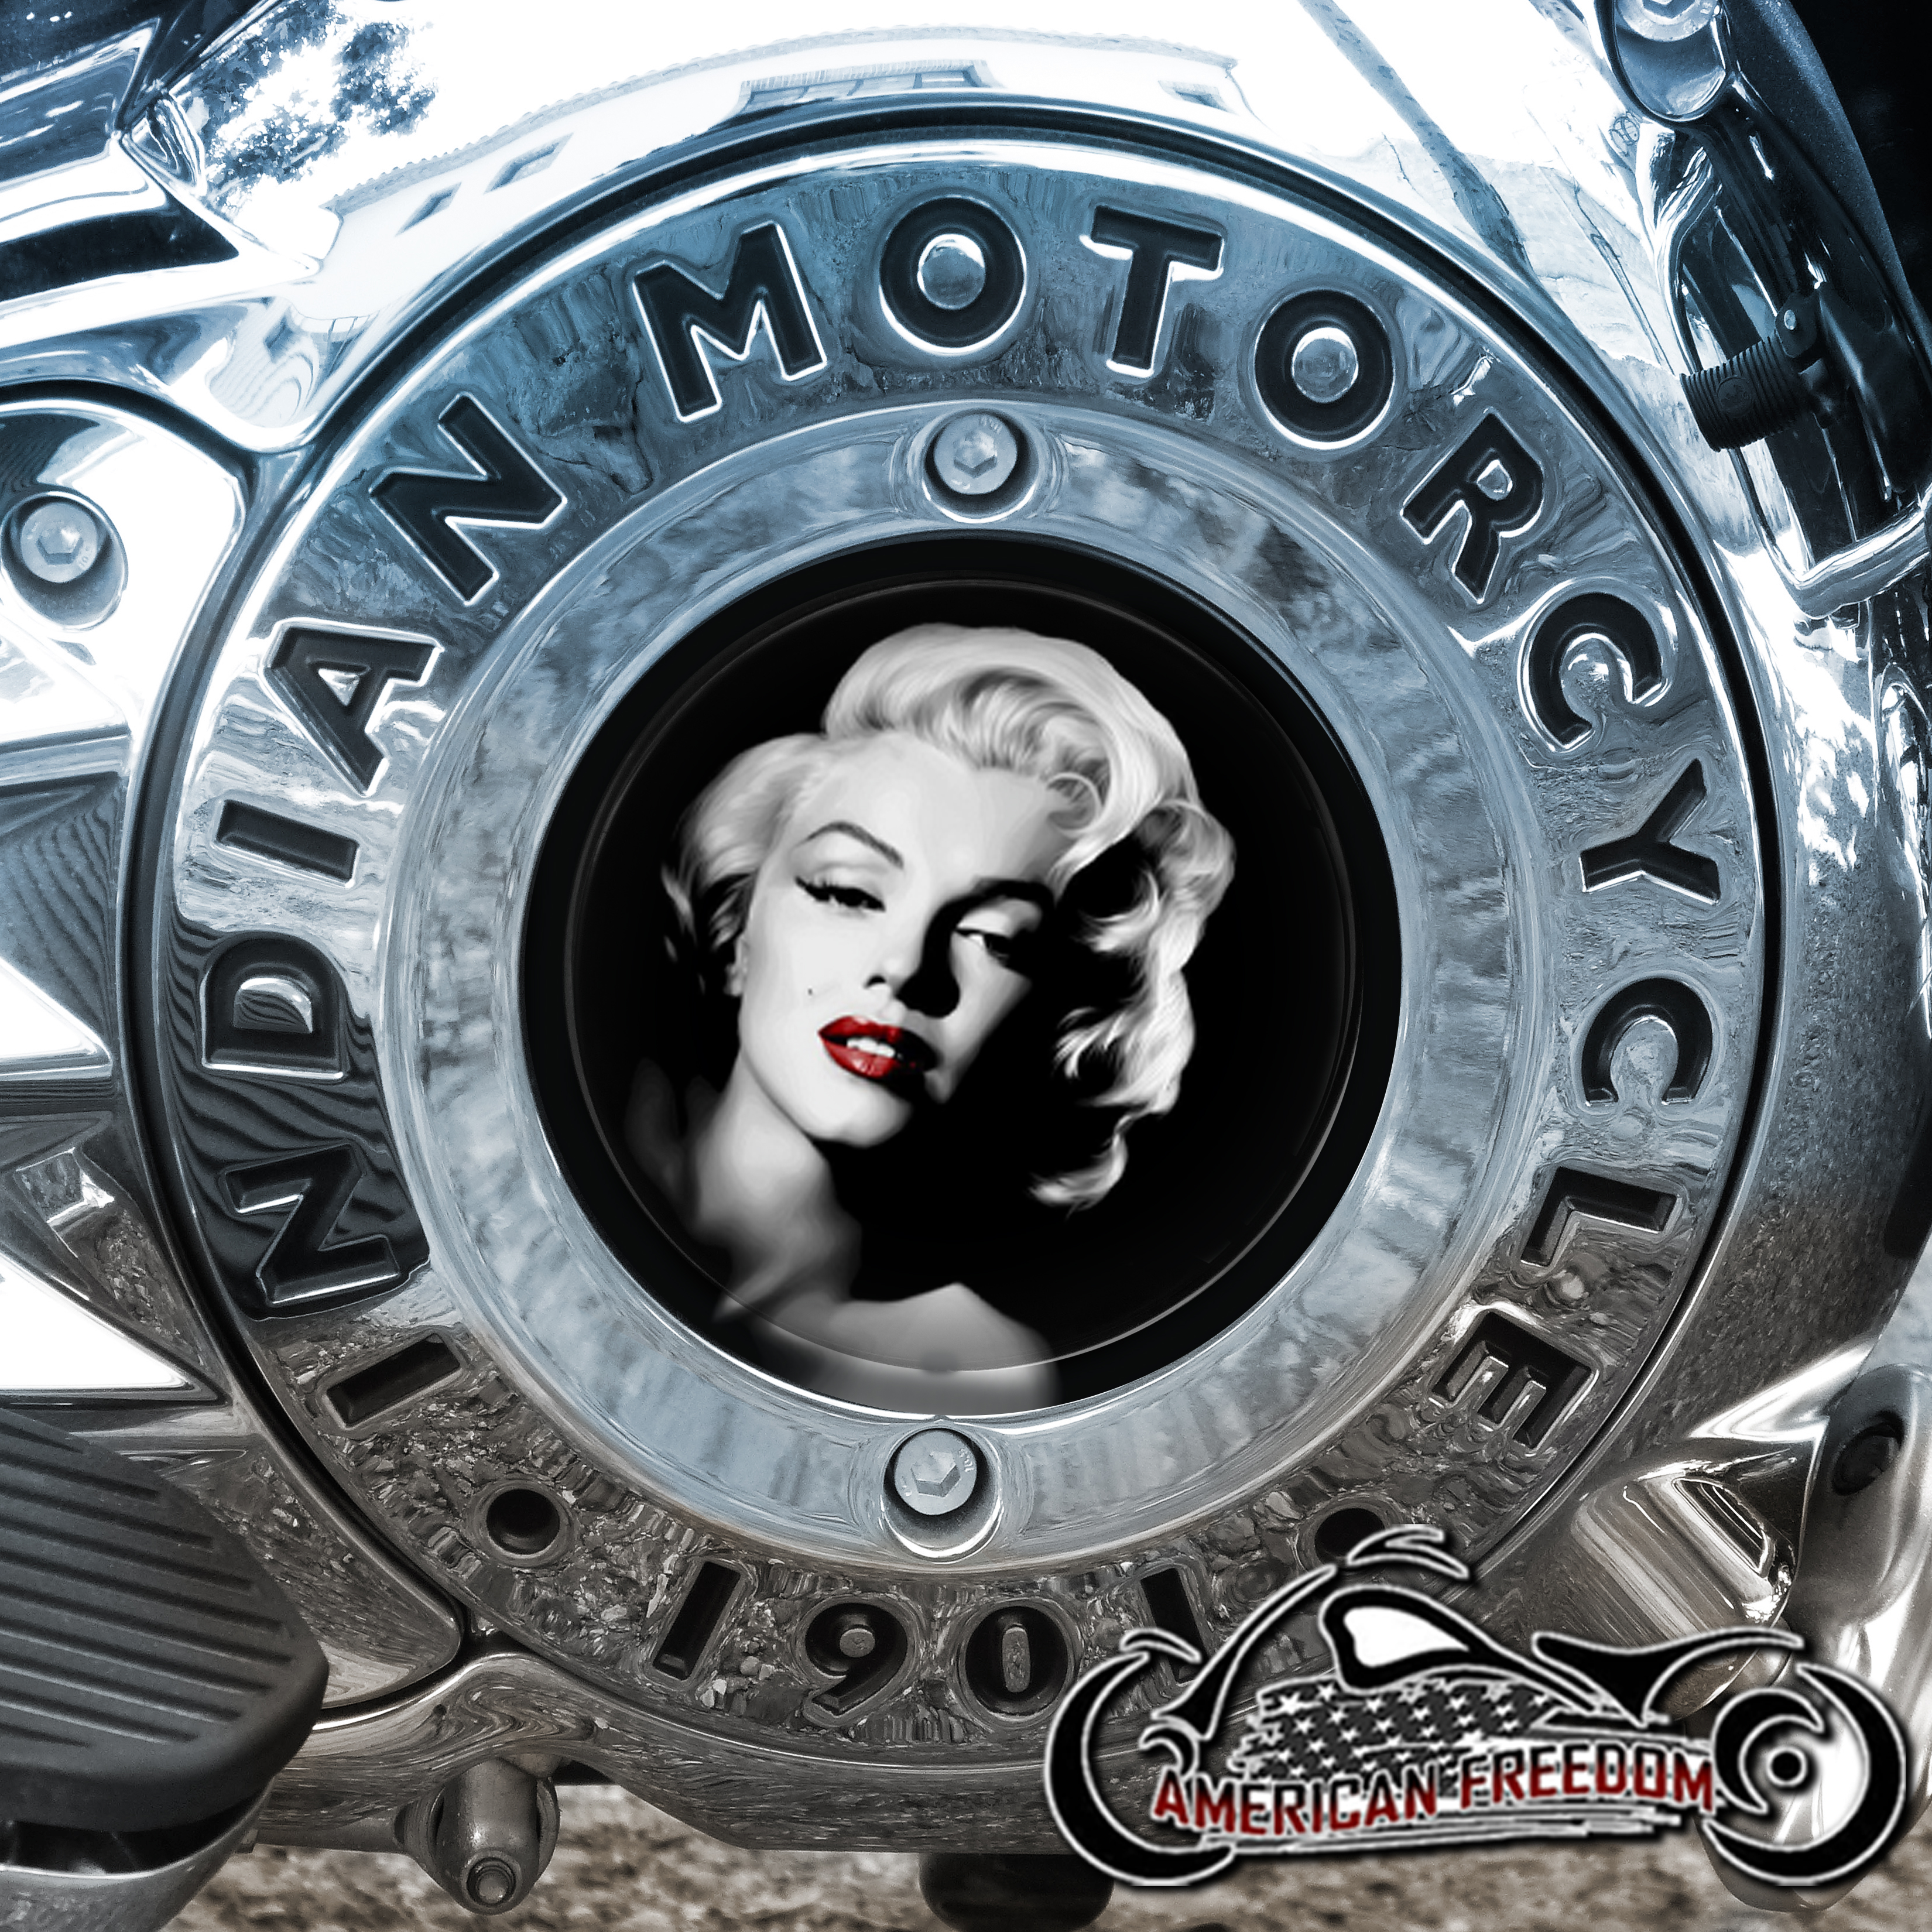 Indian Motorcycles Thunder Stroke Derby Insert - Red Lips Monroe